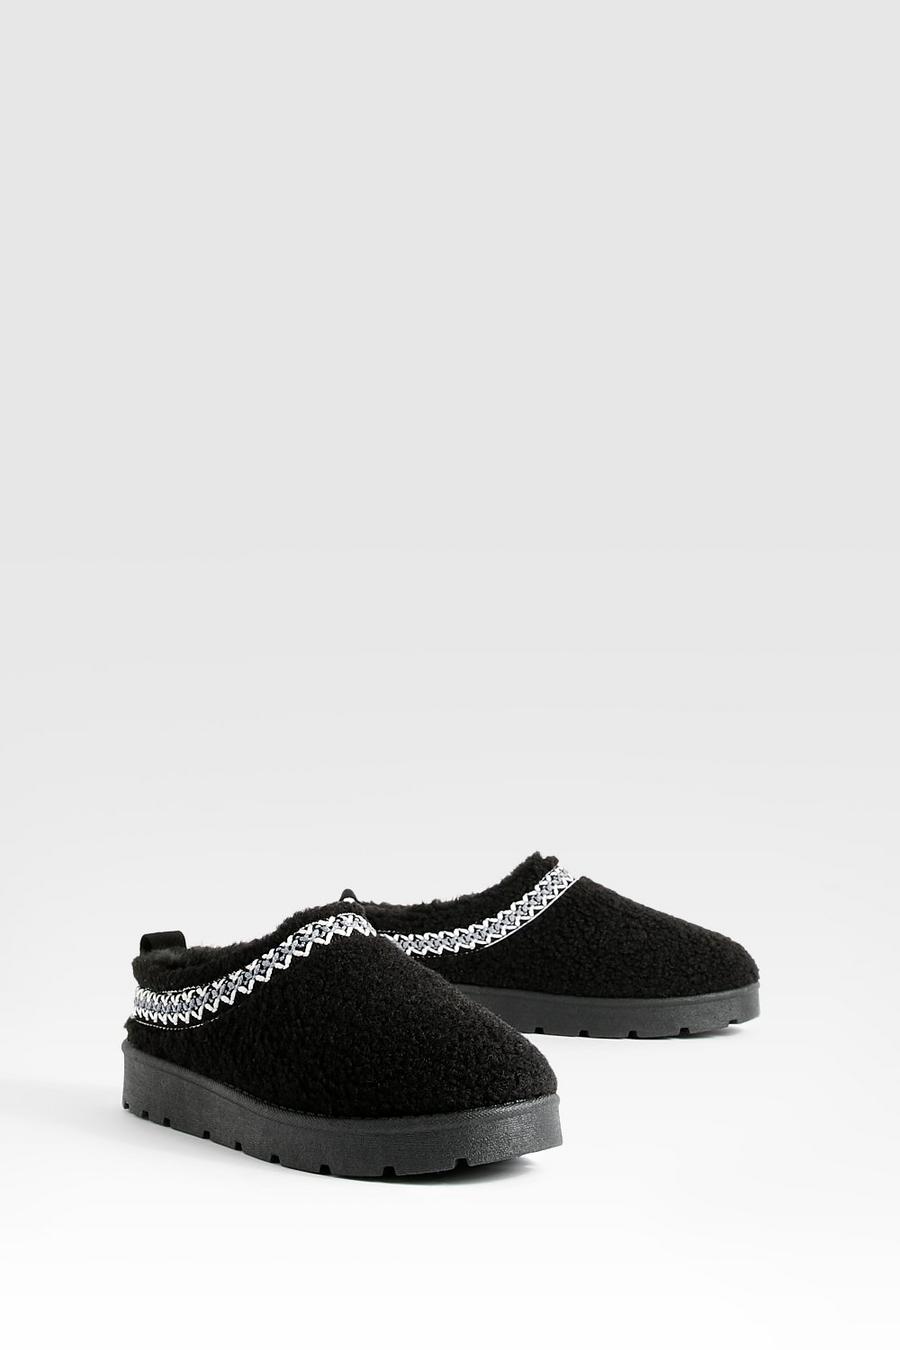 Black Embroidered Detailing Borg Slip On Cosy Mules           